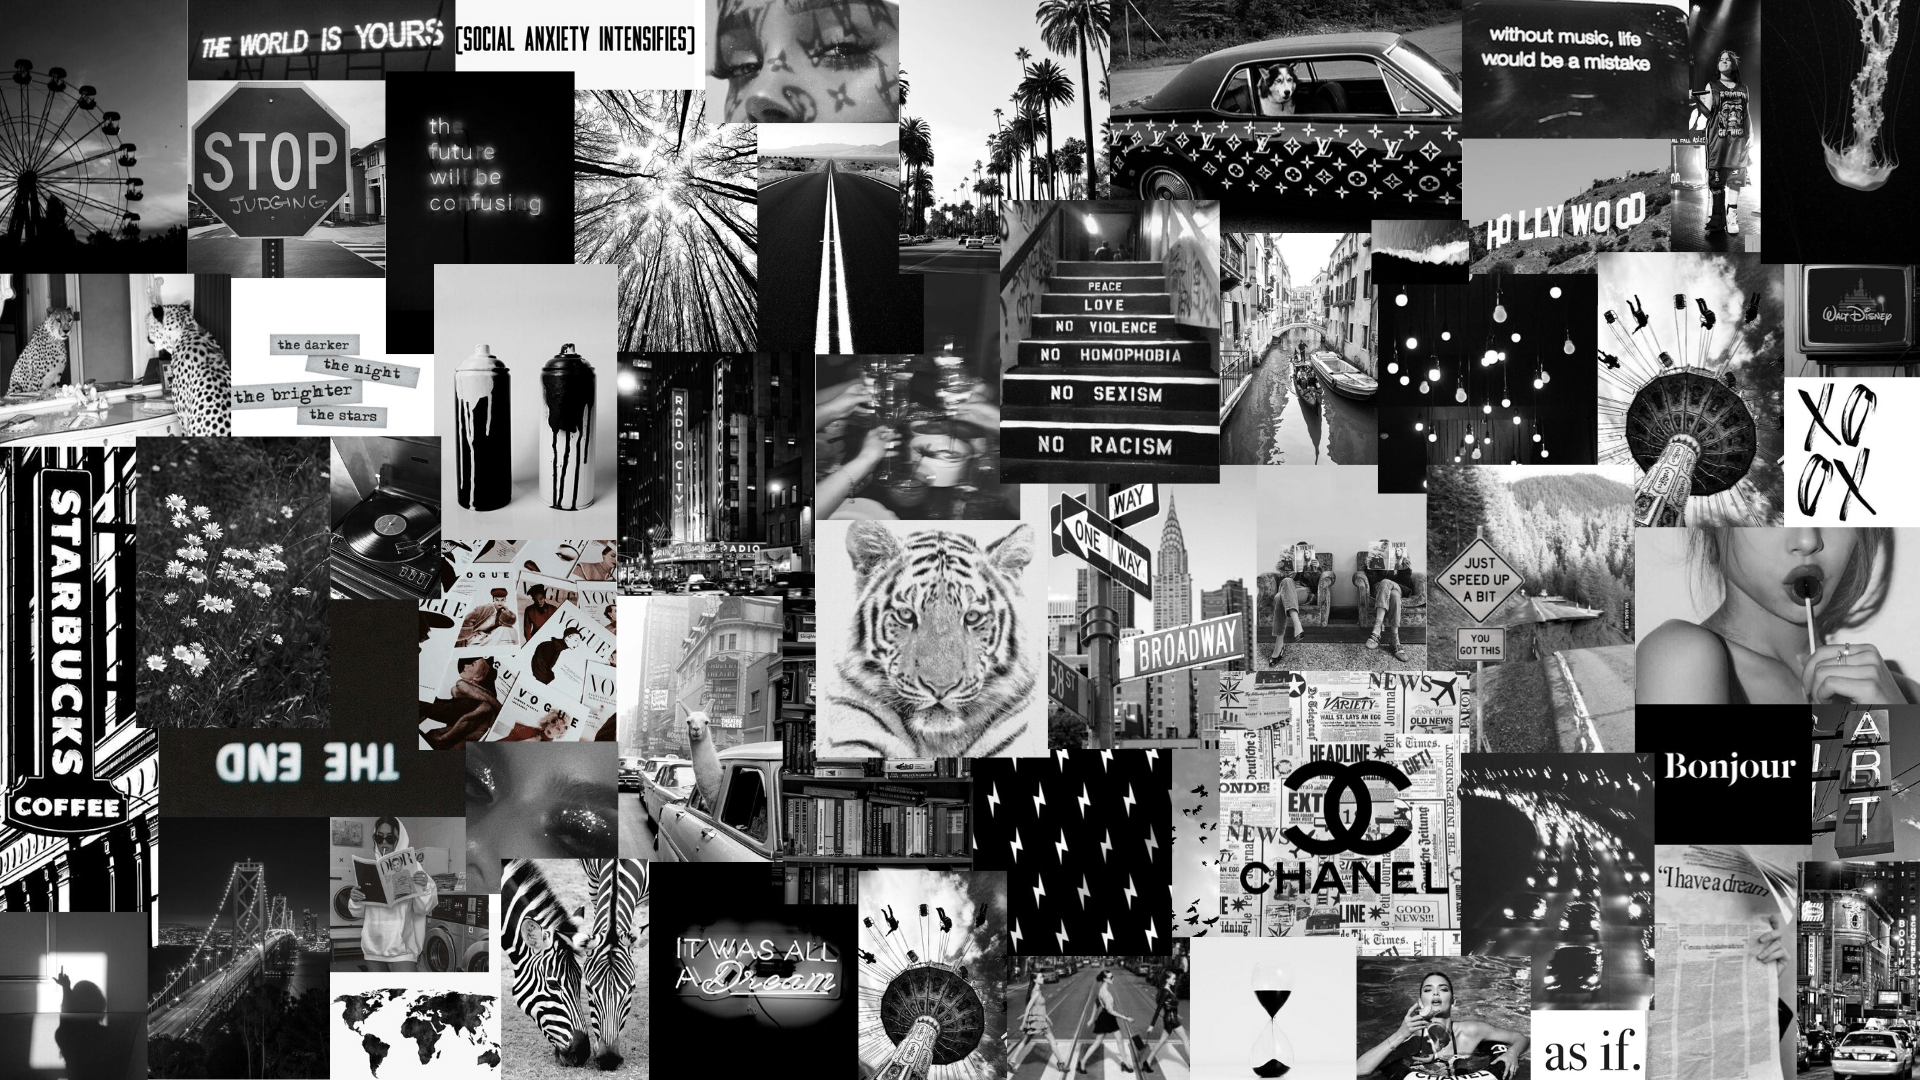 A collage of black and white images including Chanel, a tiger, and a stop sign. - Broadway